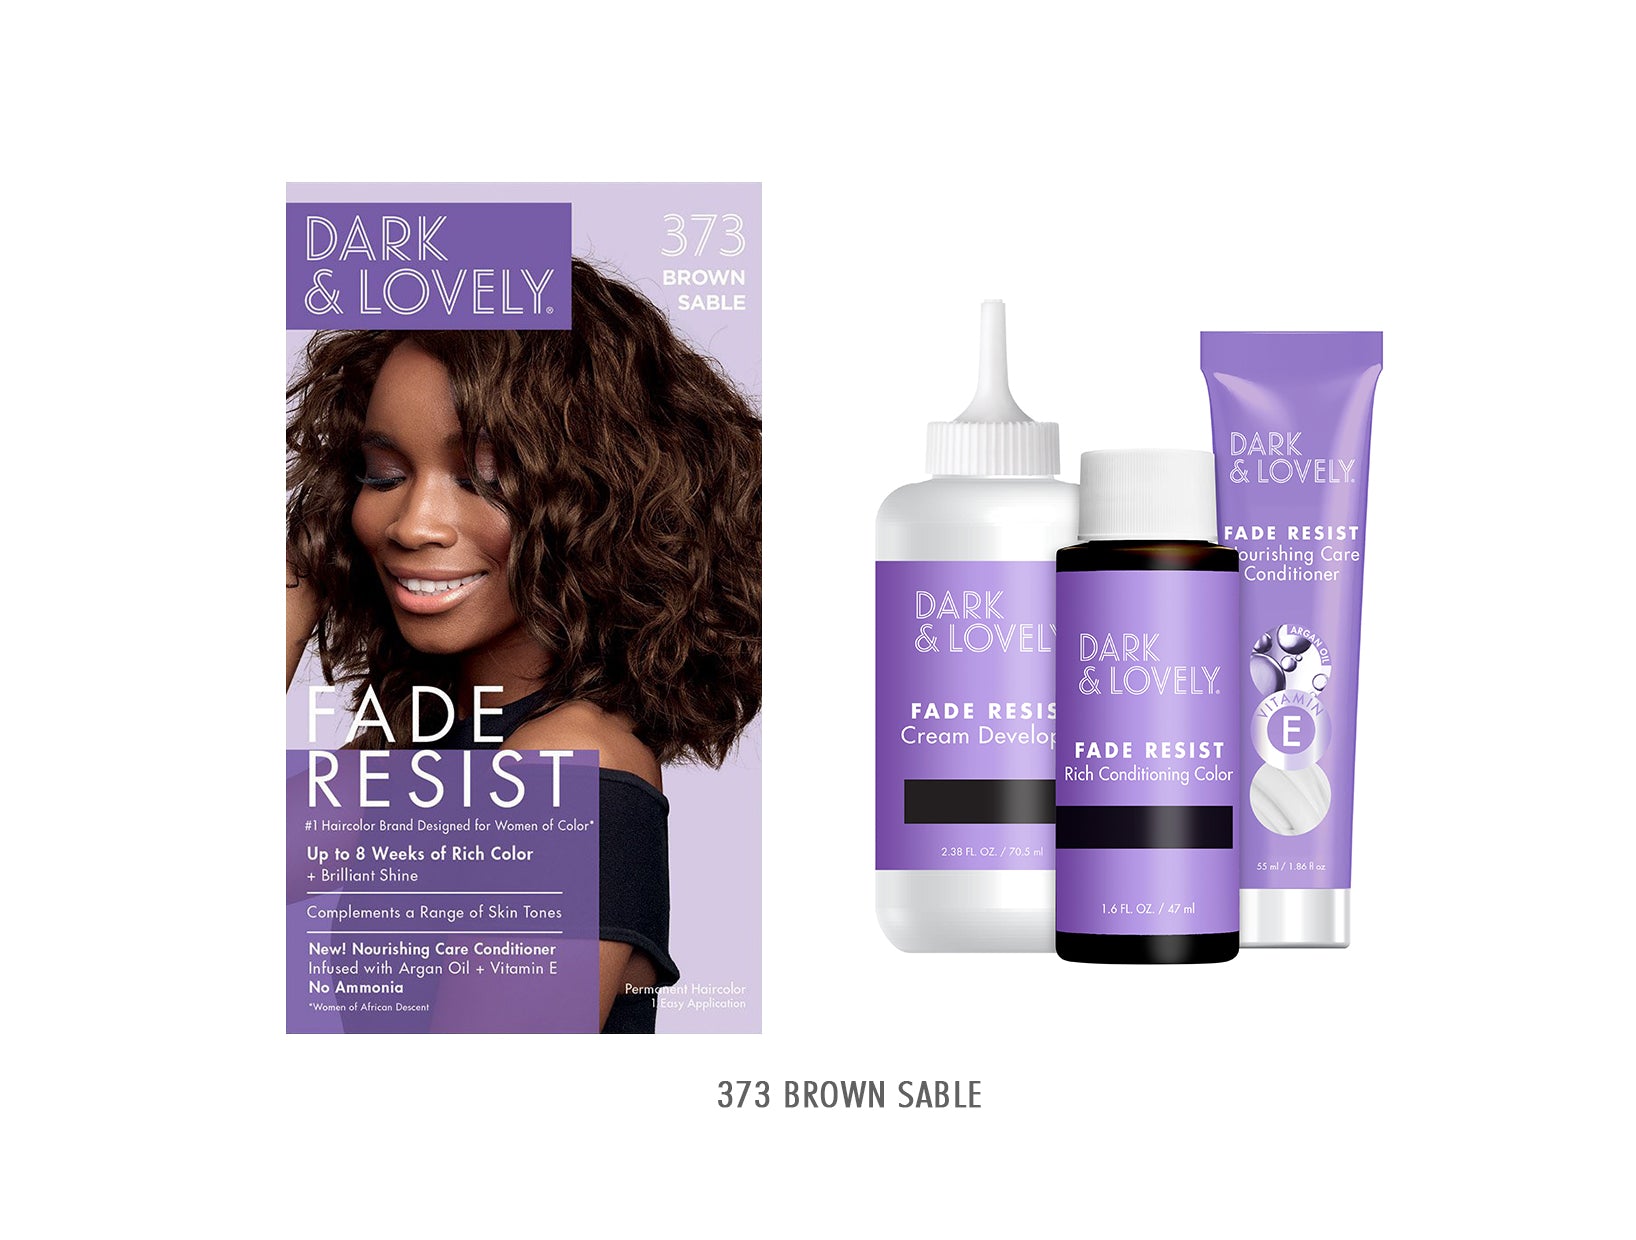 DARK AND LOVELY FADE RESIST RICH CONDITIONING COLOR KIT